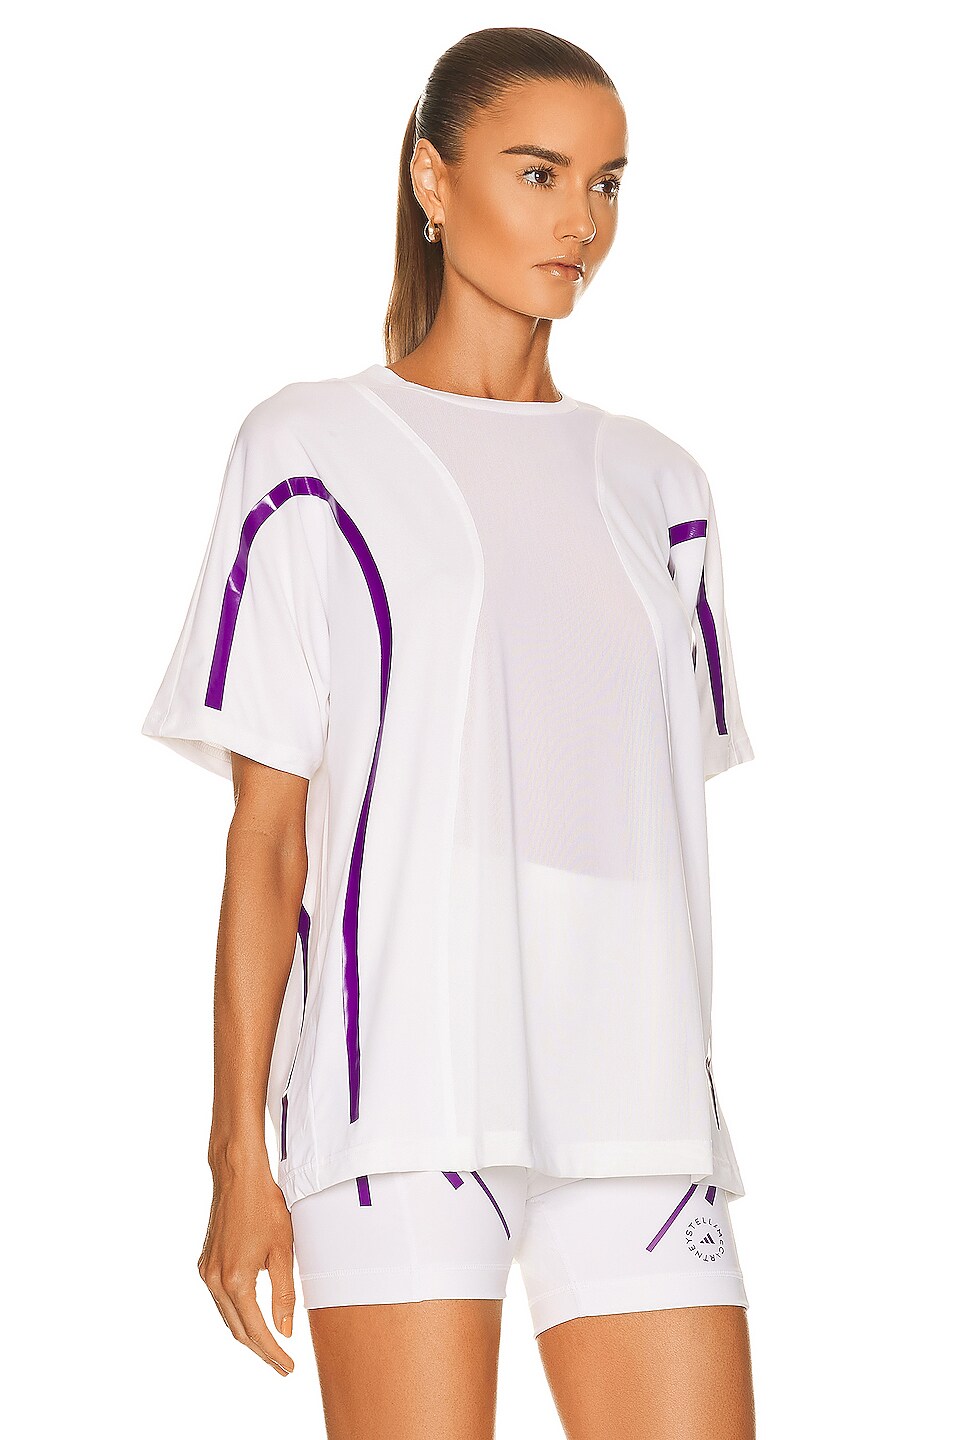 adidas by Stella McCartney True Pace Running Tee in White & Active ...